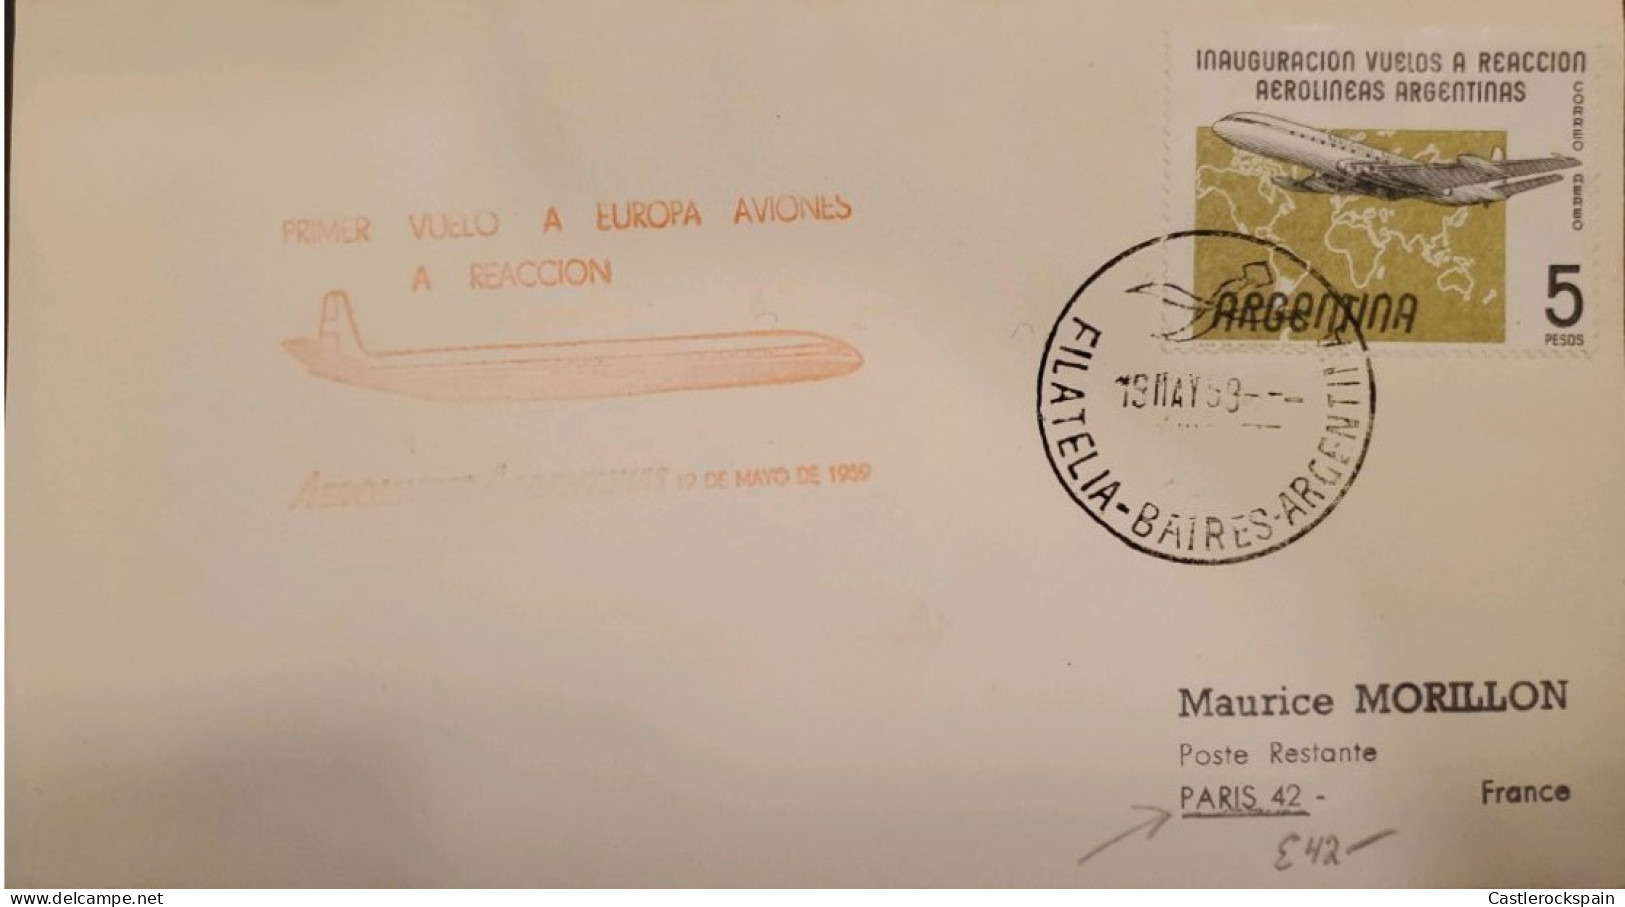 MI) 1958, ARGENTINA, FIRST FLIGHT TO EUROPE CANCELLATION, FROM BUENOS AIRES TO PARIS - FRANCE, AIR MAIL, XF - Oblitérés